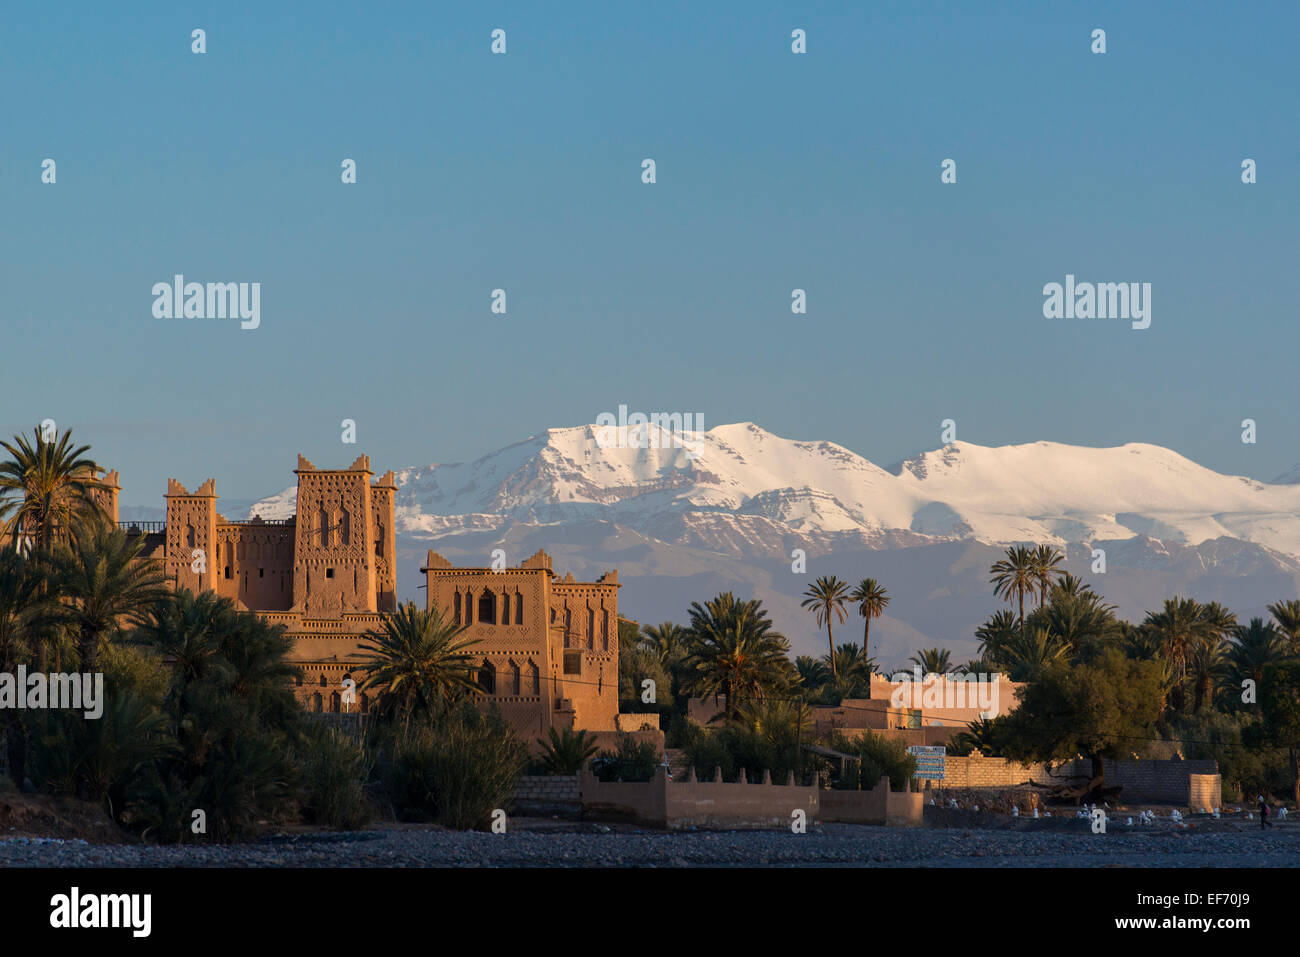 Kasbah Amerhidil in the oasis town of Skoura, Morocco, backdropped by the Atlas Mountains Stock Photo